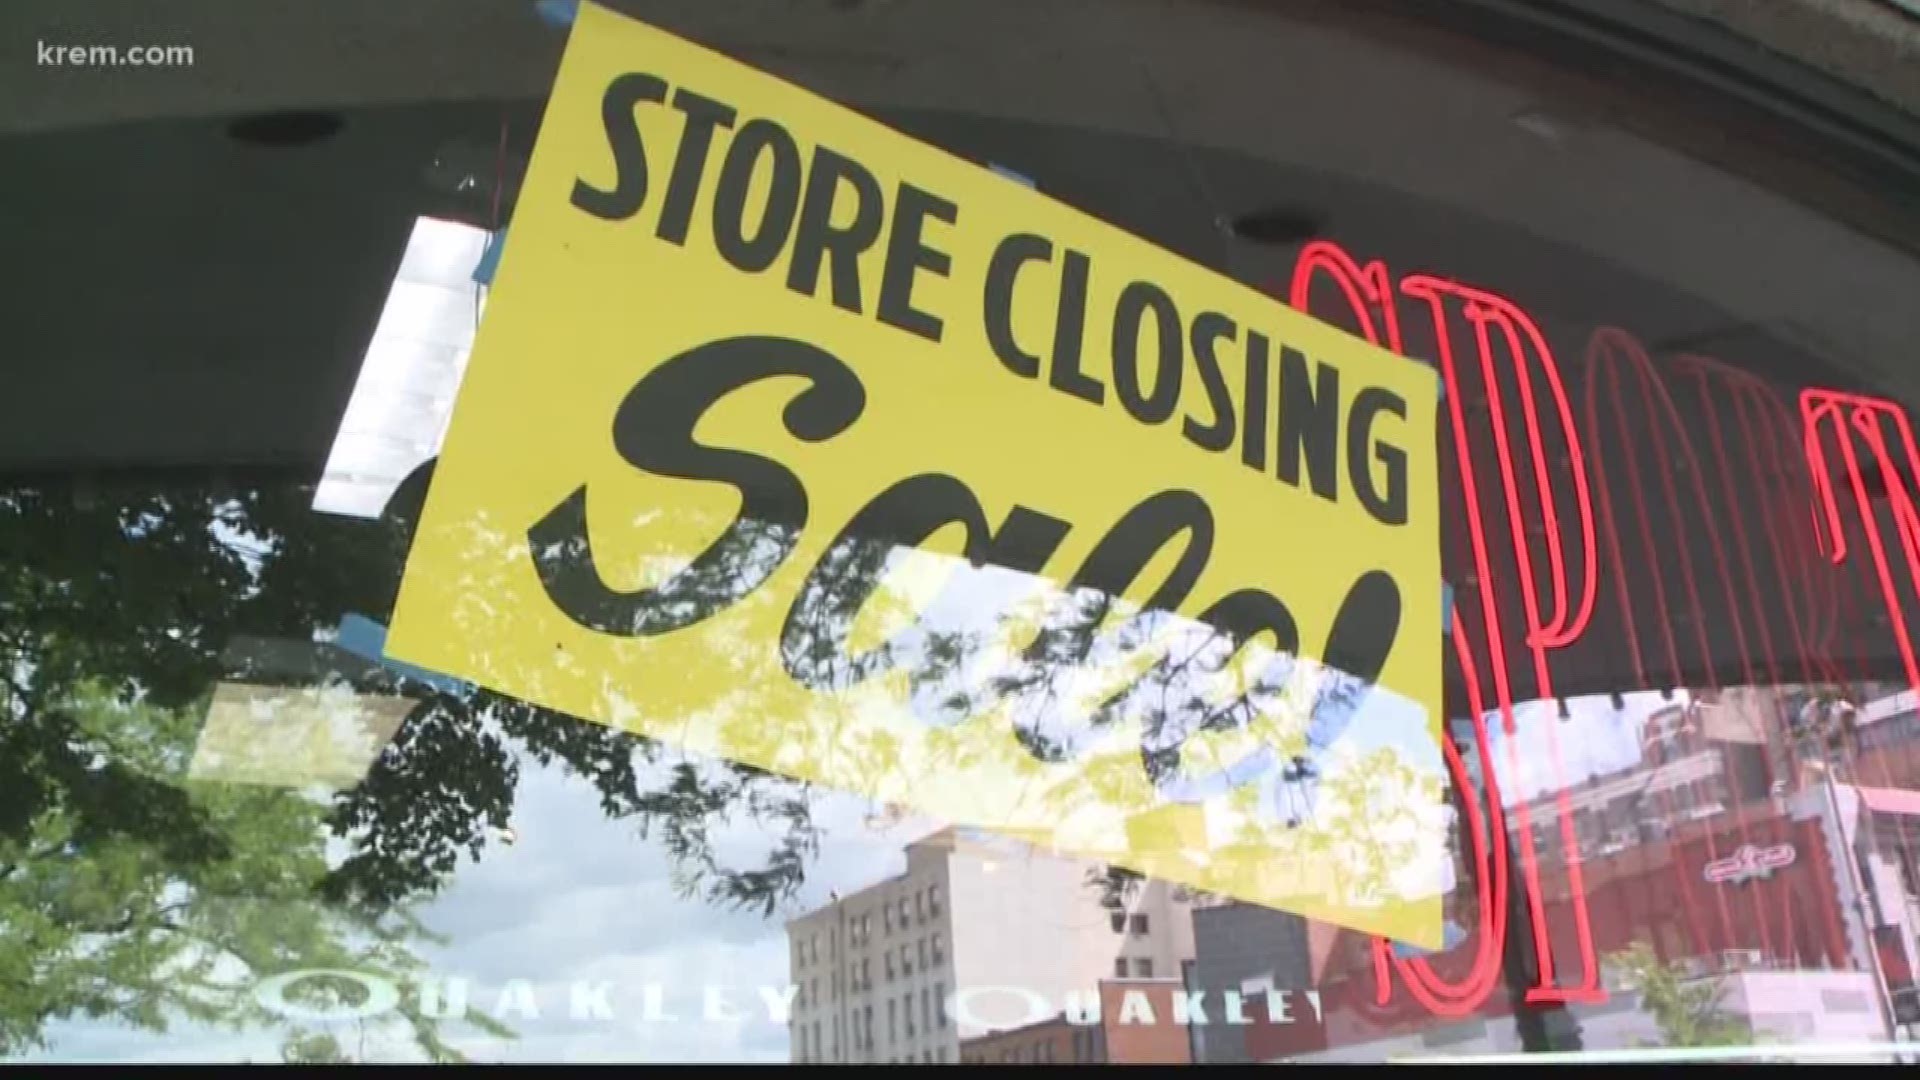 KREM 2's Danamarie McNicholl spoke to one store owner who's closing his doors because he can't compete.